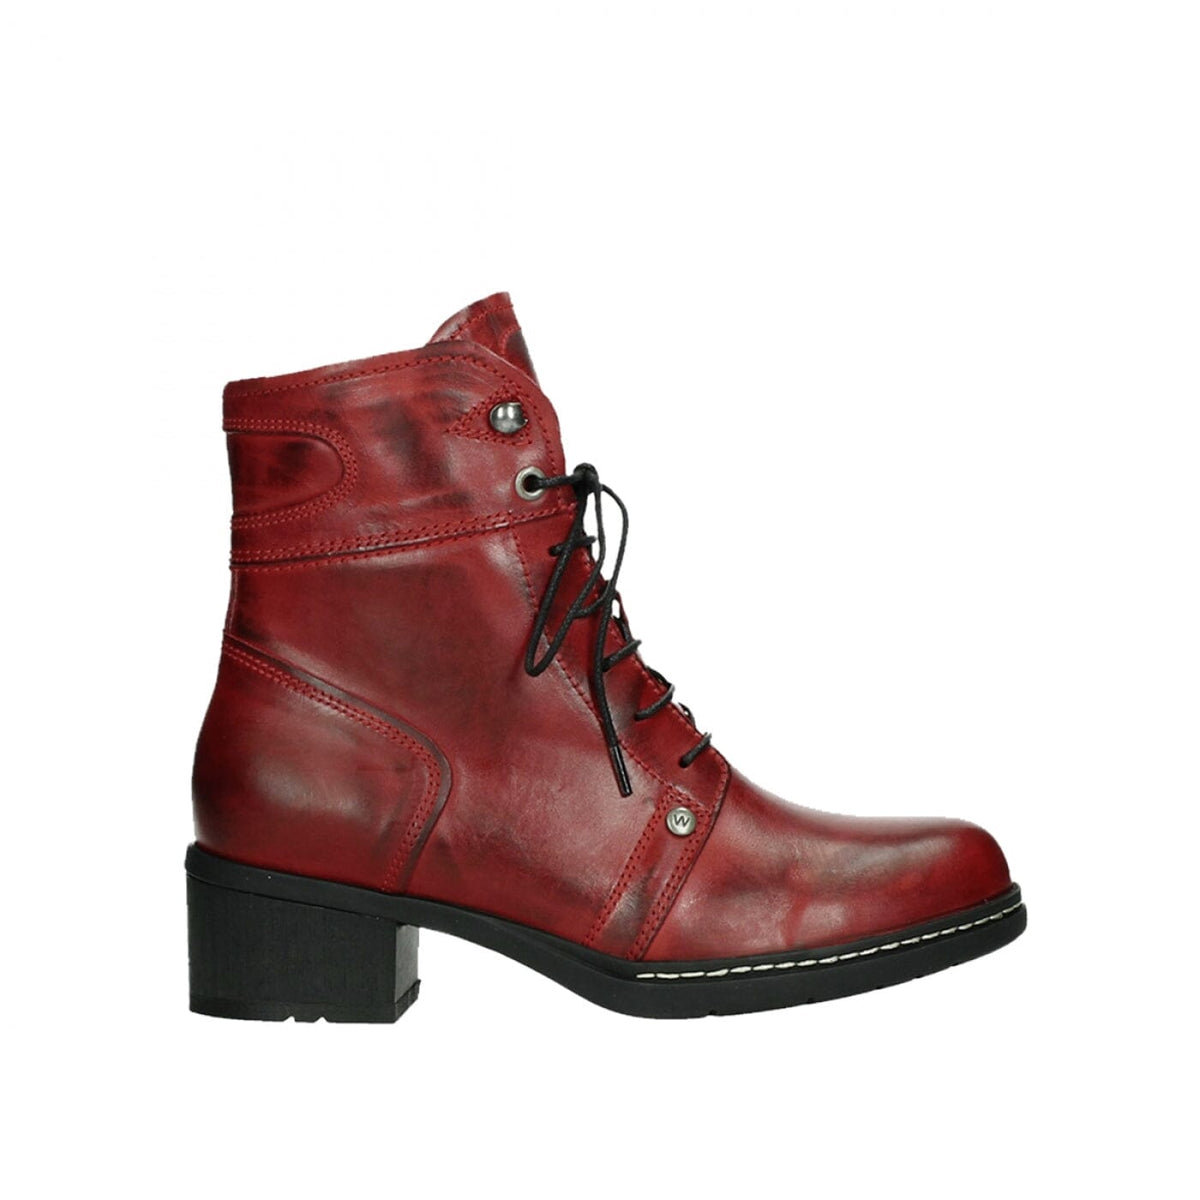 Wolky, Red Deer, Boots, Soft Wax Leather, Dark Red Boots Wolky 